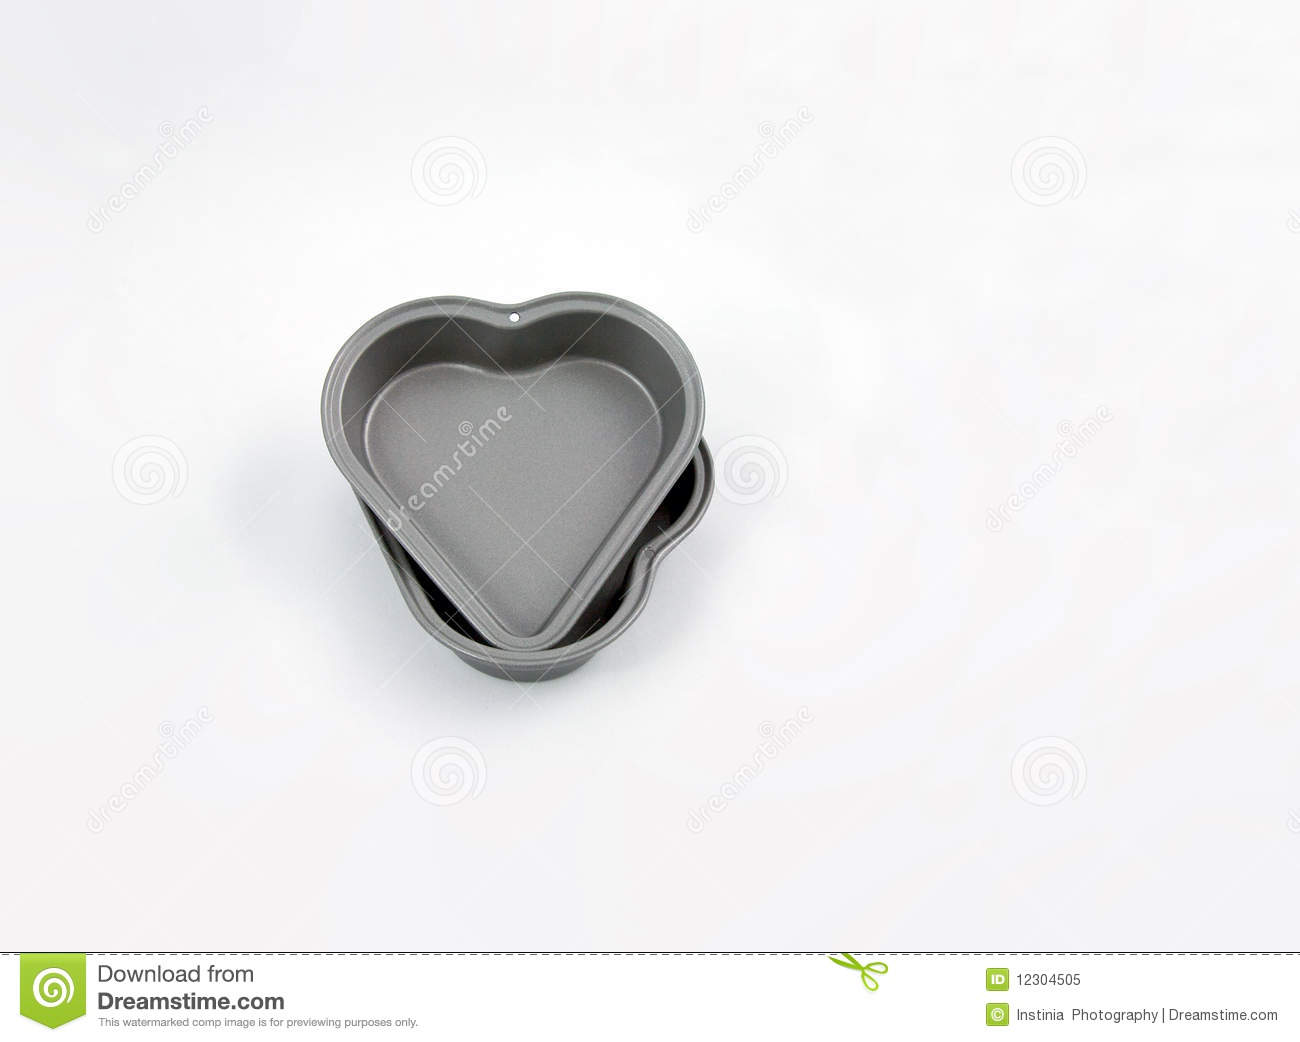 Baking Two Heart Tart Tins Kitchen Related Royalty Free Stock Photo    